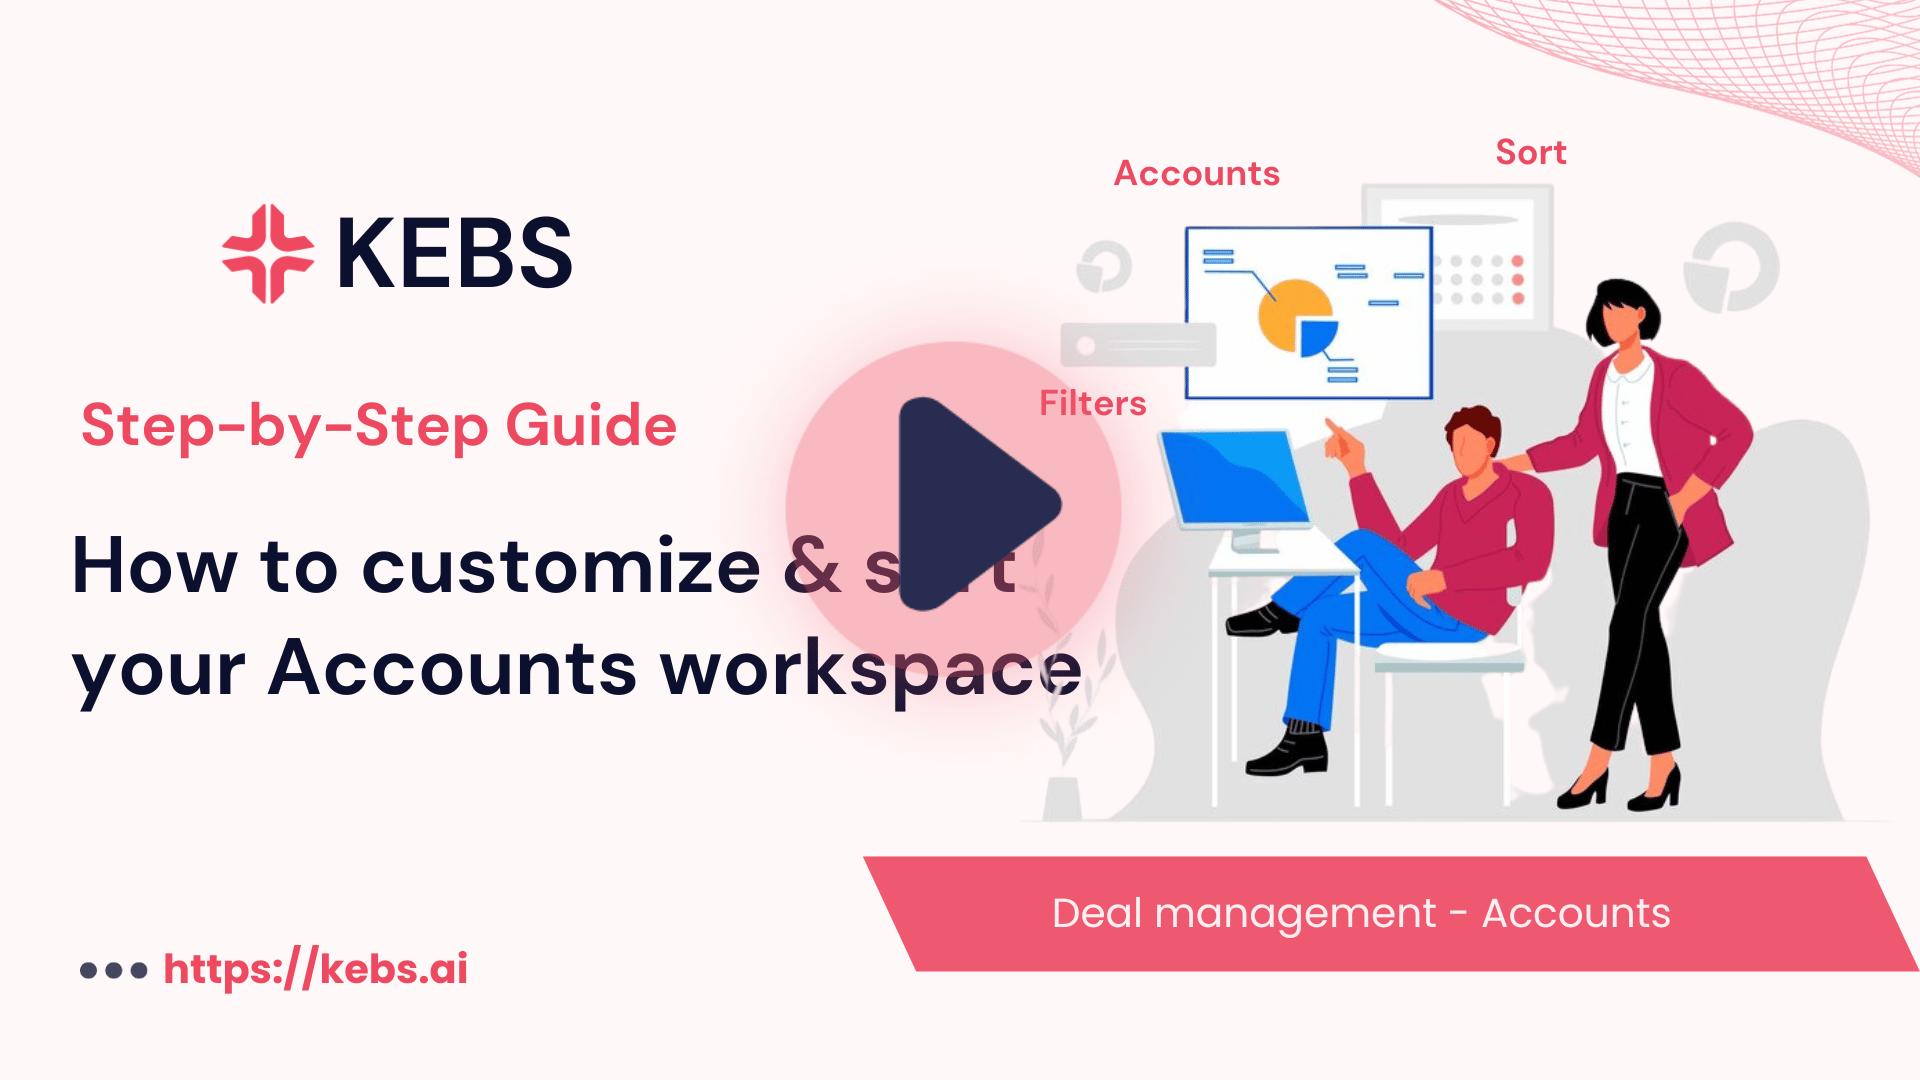 How to customize & sort your Accounts workspace